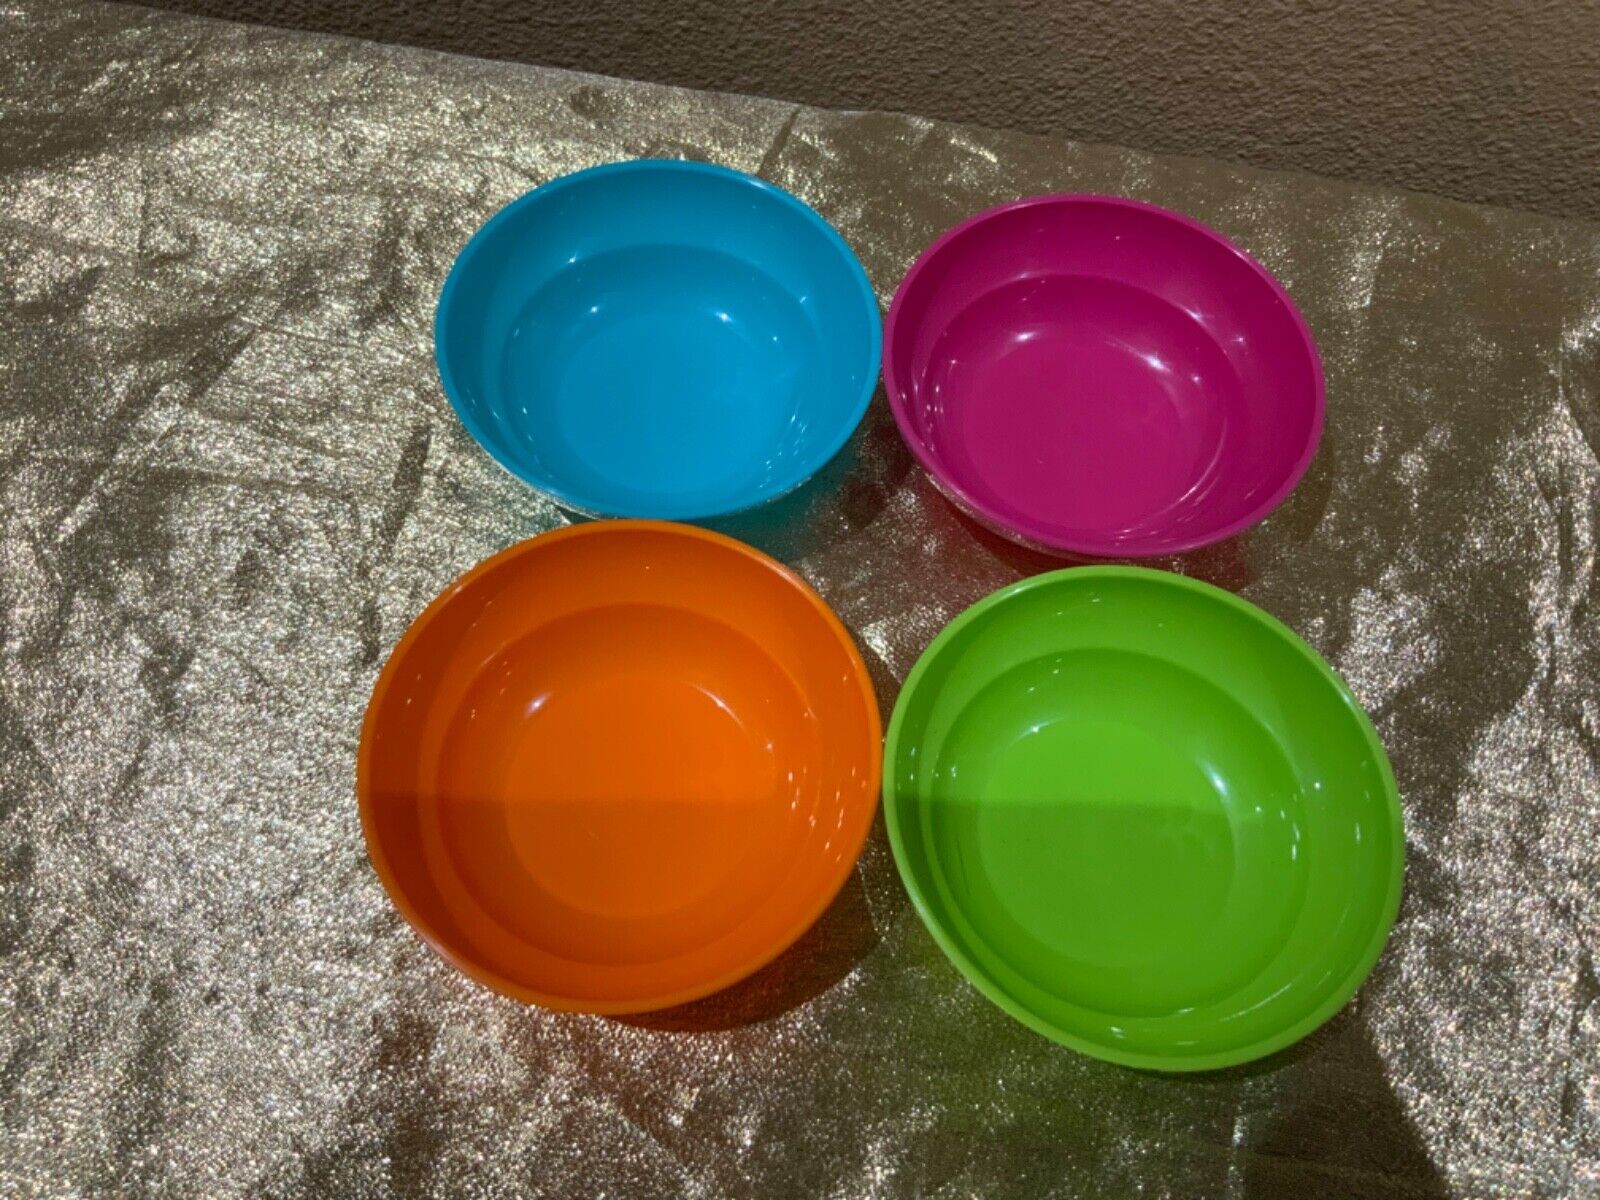 New Tupperware Play Set of 4 Kids Mini Colorful Salad Bowls 50ml each one